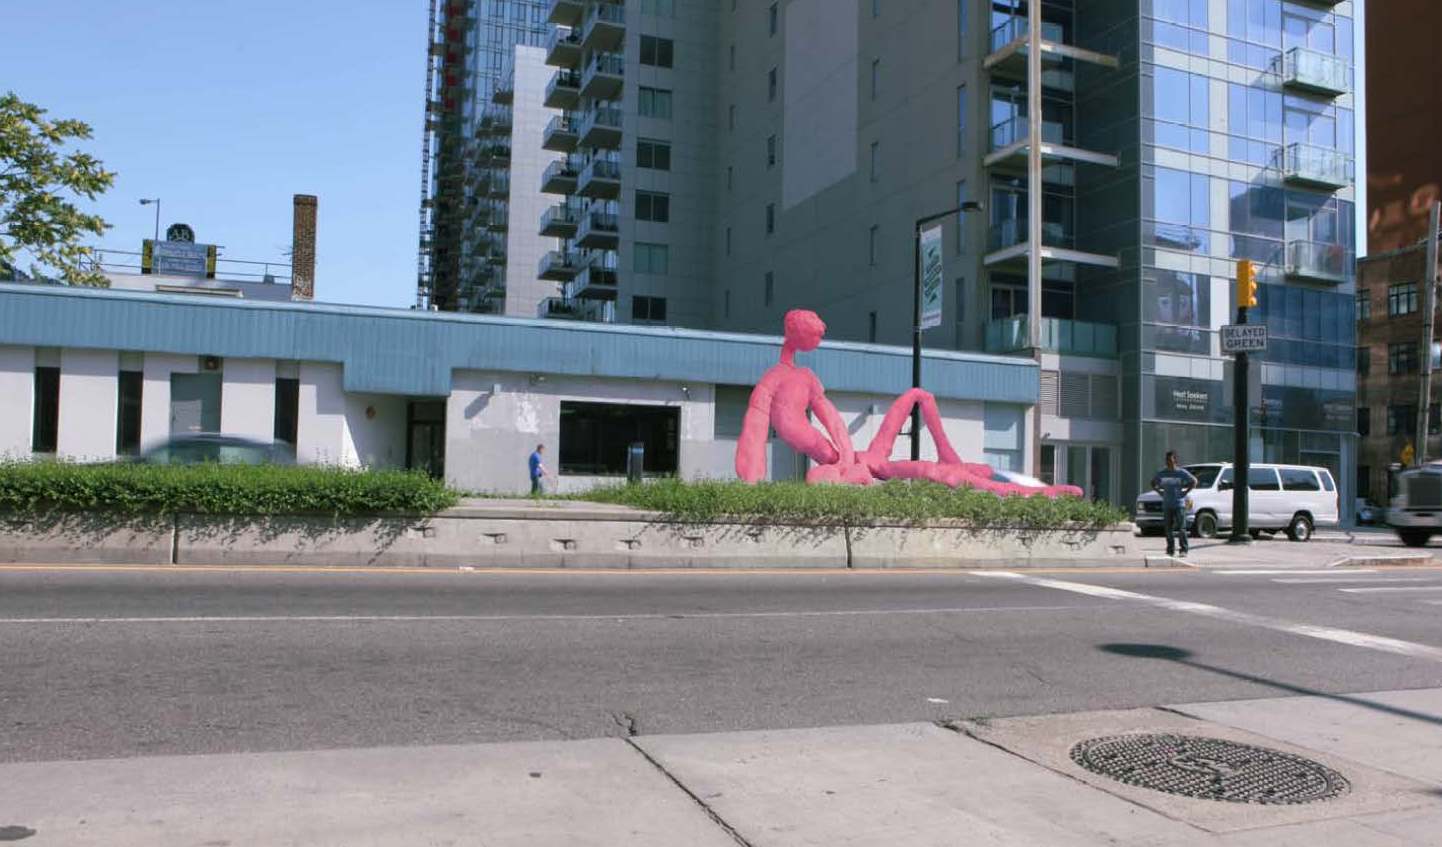 "The Sunbather," an 8.5-foot statue, will be erected in Long Island City next year on Jackson and 43rd Avenues.